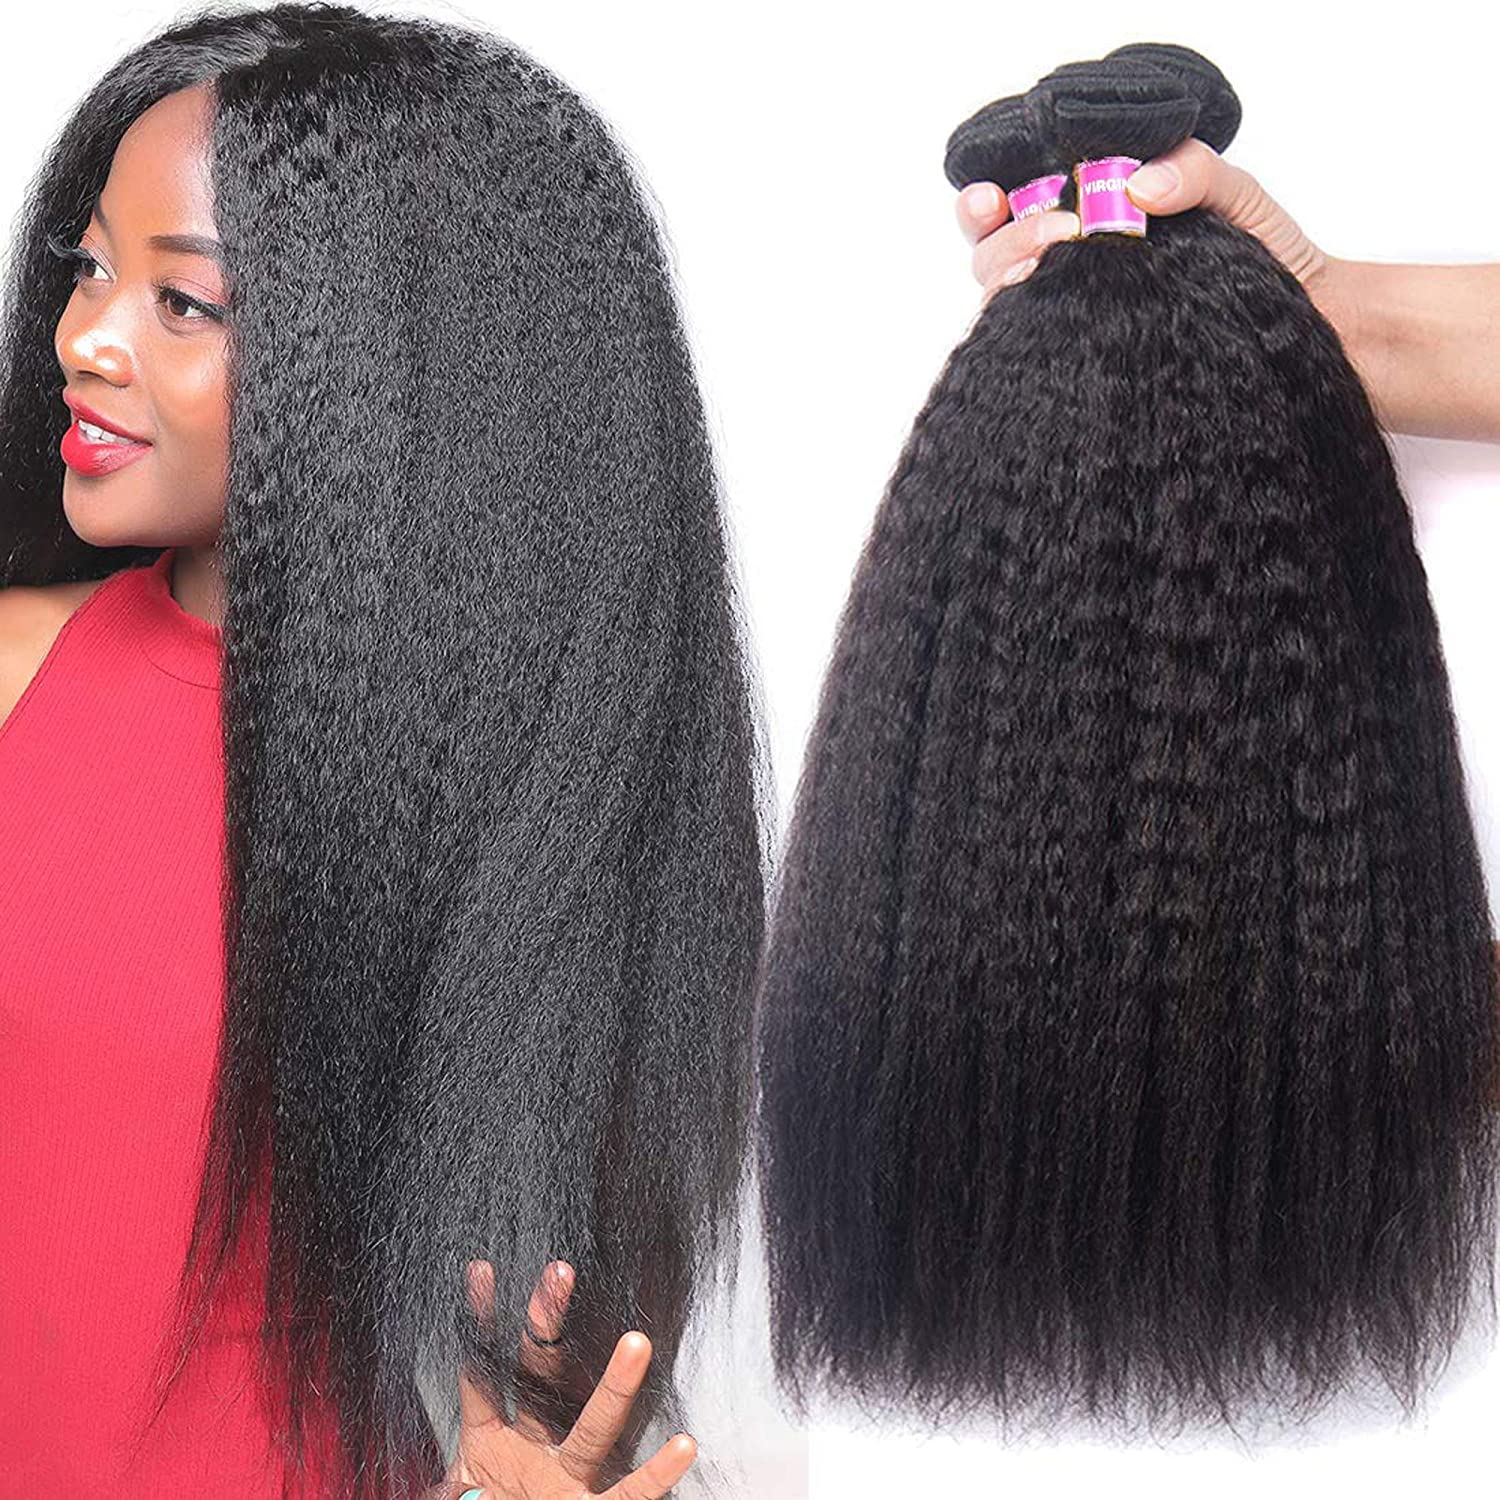  Amella Hair 8A Brazilian Curly Hair Weave 3 Bundles (14 16 18  inch,285g) Virgin Kinky Human Hair 100% Unprocessed Hair Weft Extensions  Natural Black Color : Beauty & Personal Care